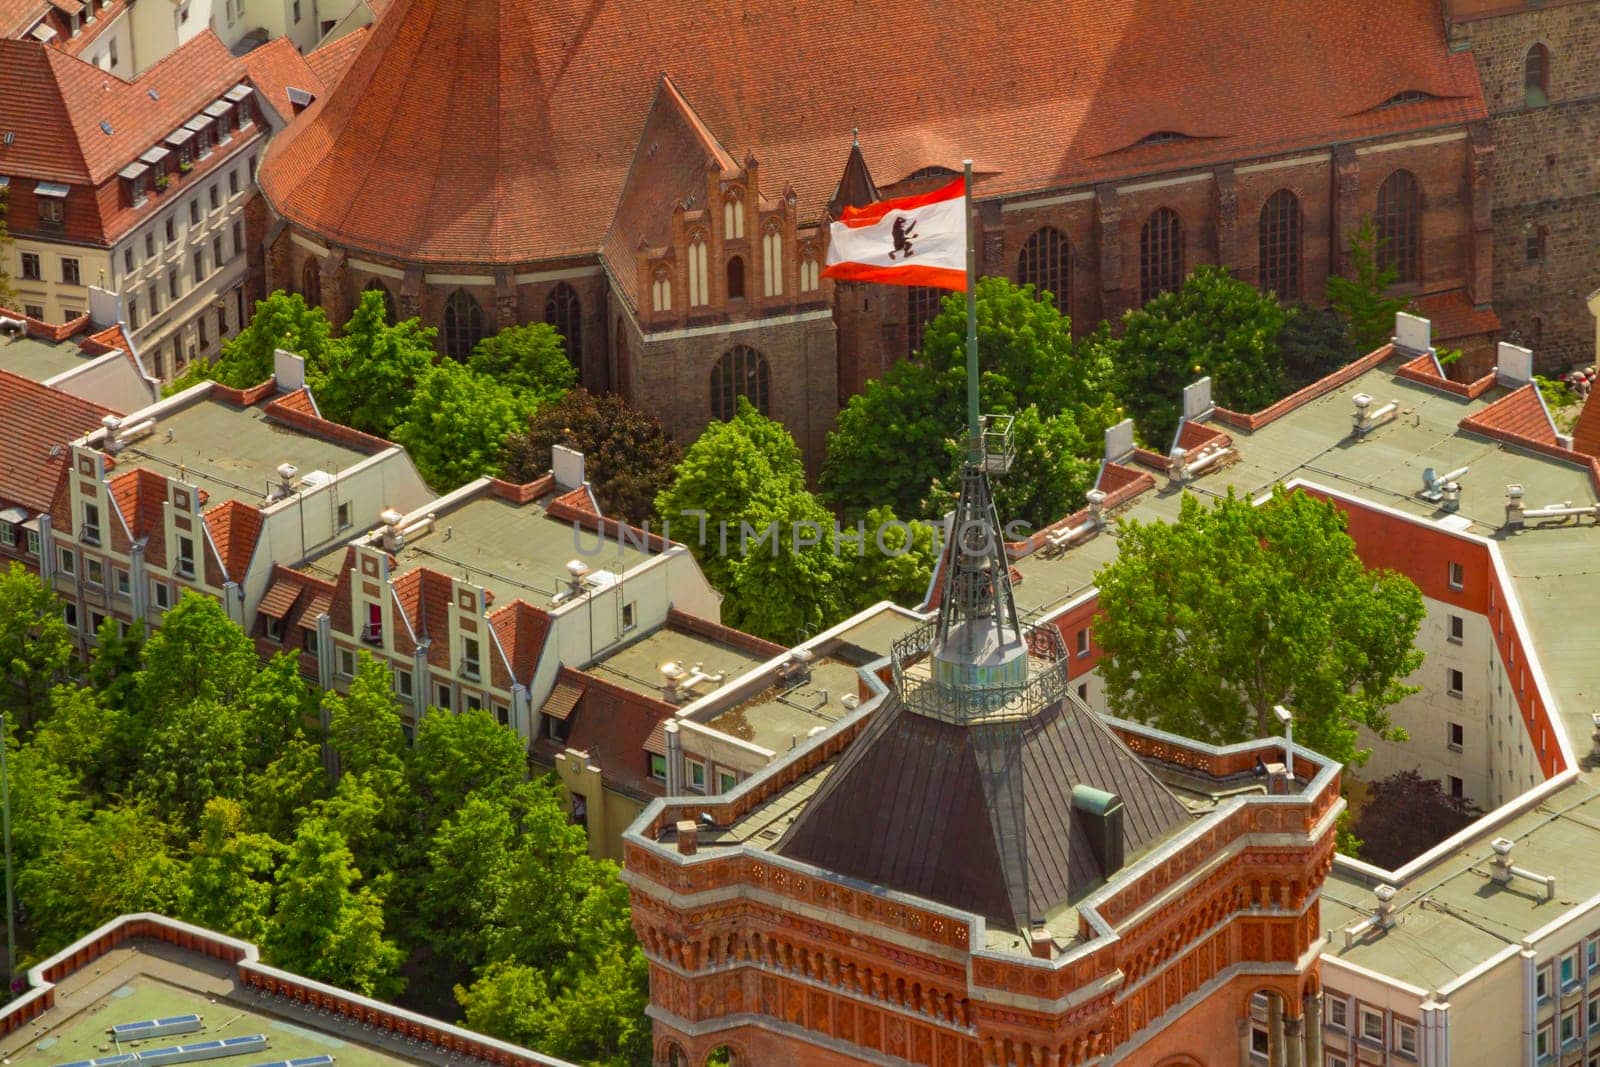 Aerial view of the flag of berlin on the top of Rotes Rathaus (Red City Hall) building.